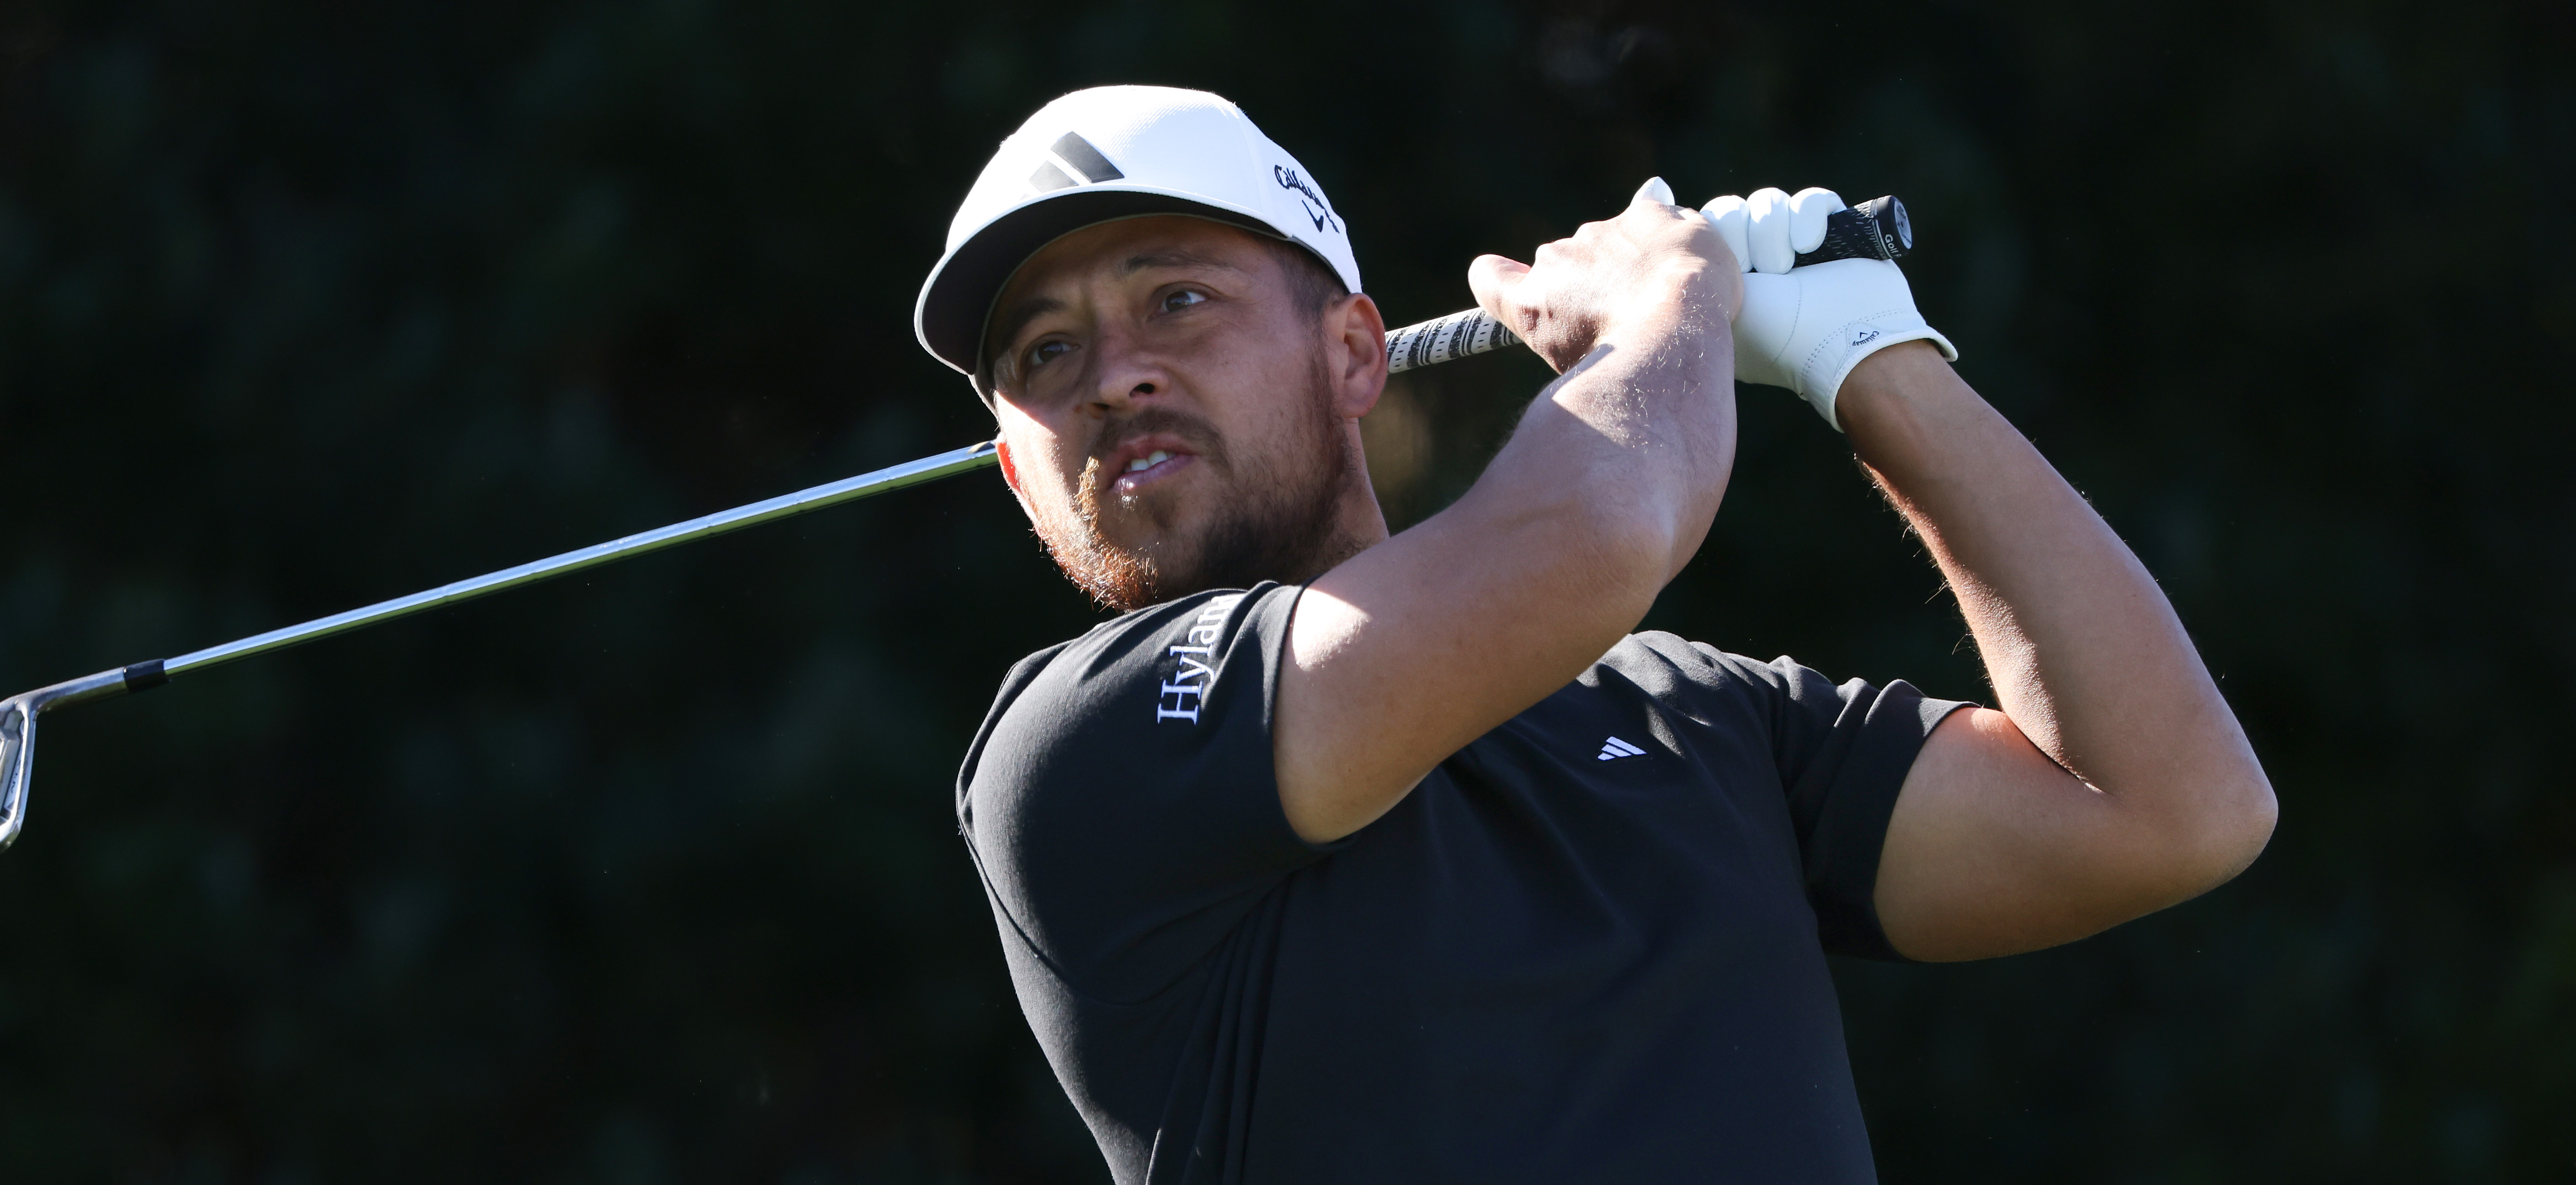 2023 Farmers Insurance Open Betting Preview, Odds, Picks & Predictions: Our PGA Model Is Backing Schauffele